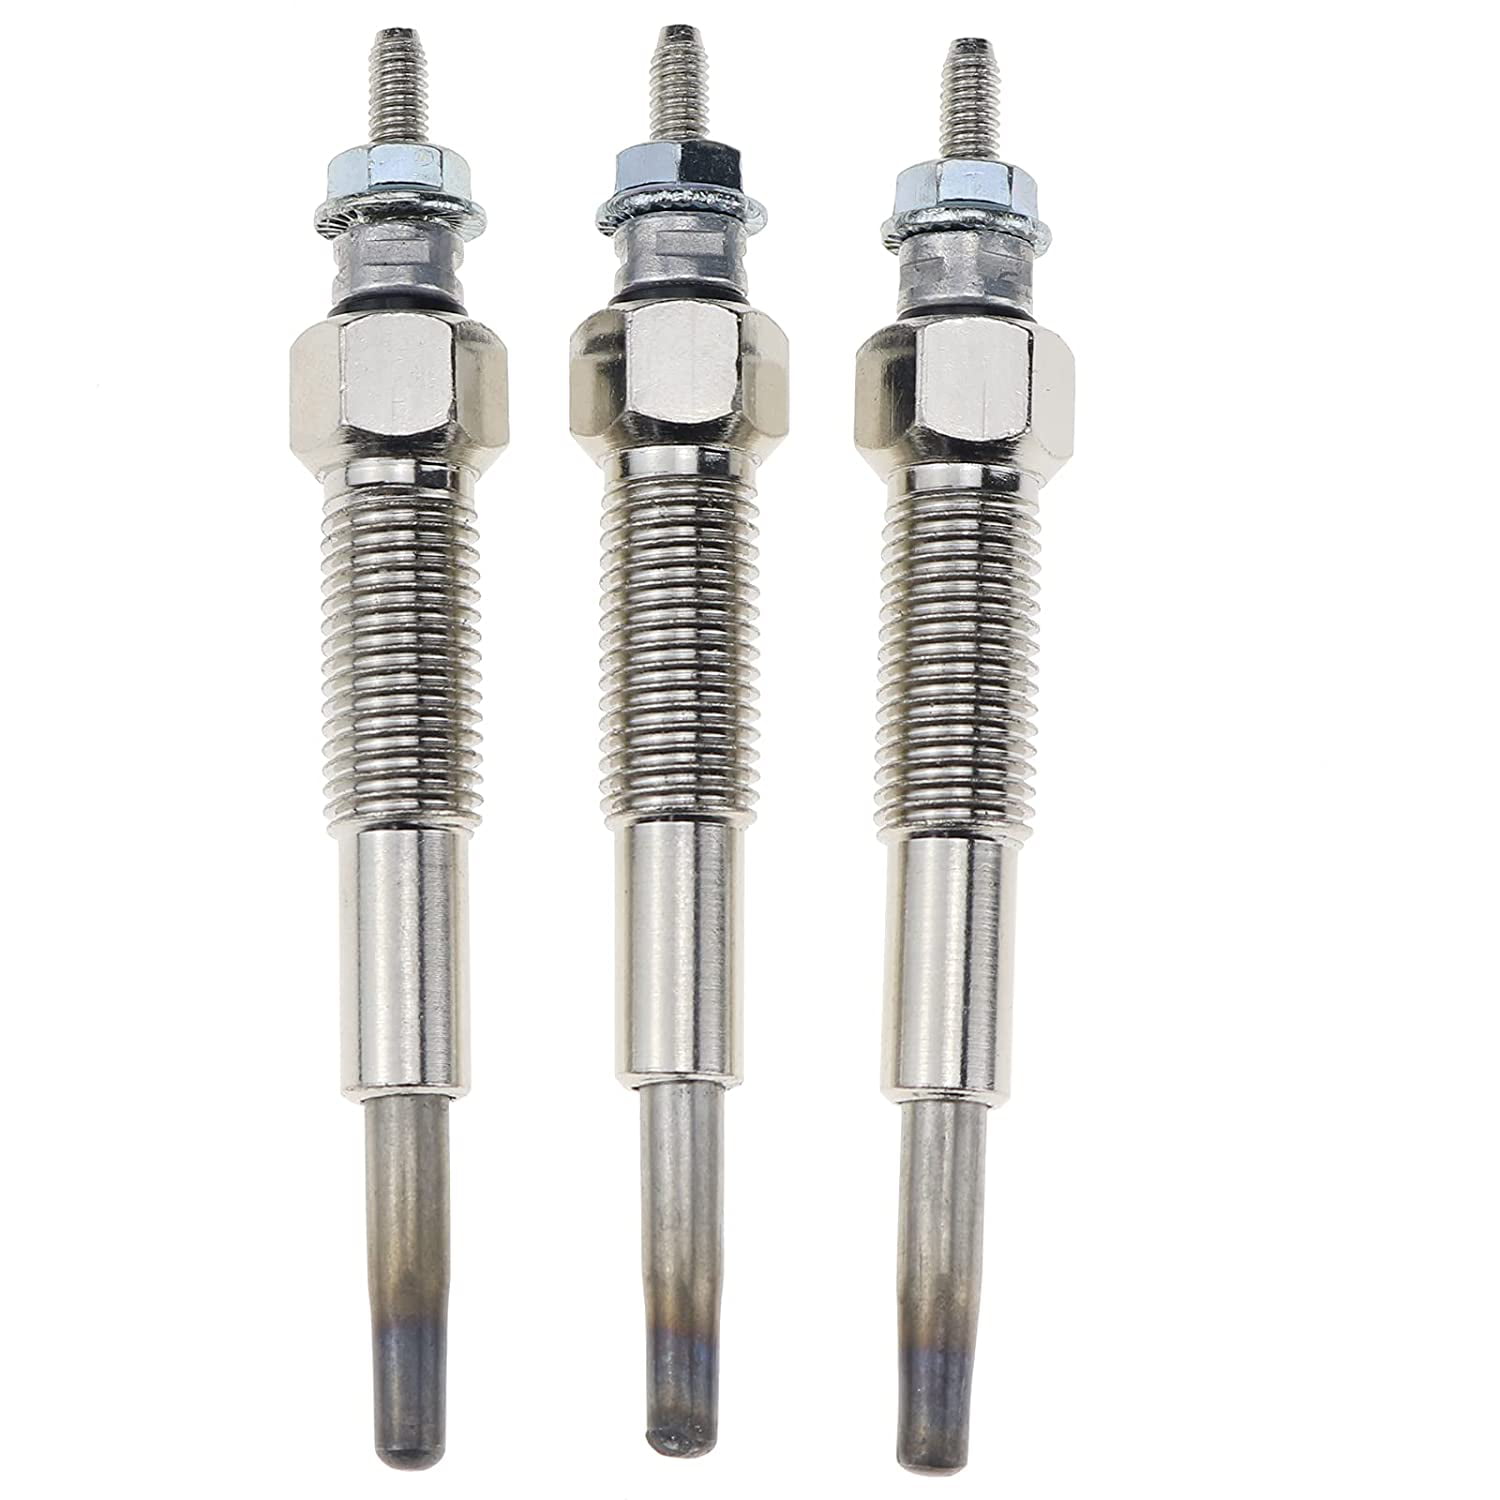 New SBA185366190 Glow Plug 3pcs for Ford Tractor 1620 1530 1630 1710 1715 1720 1725 1910 1925 1990 